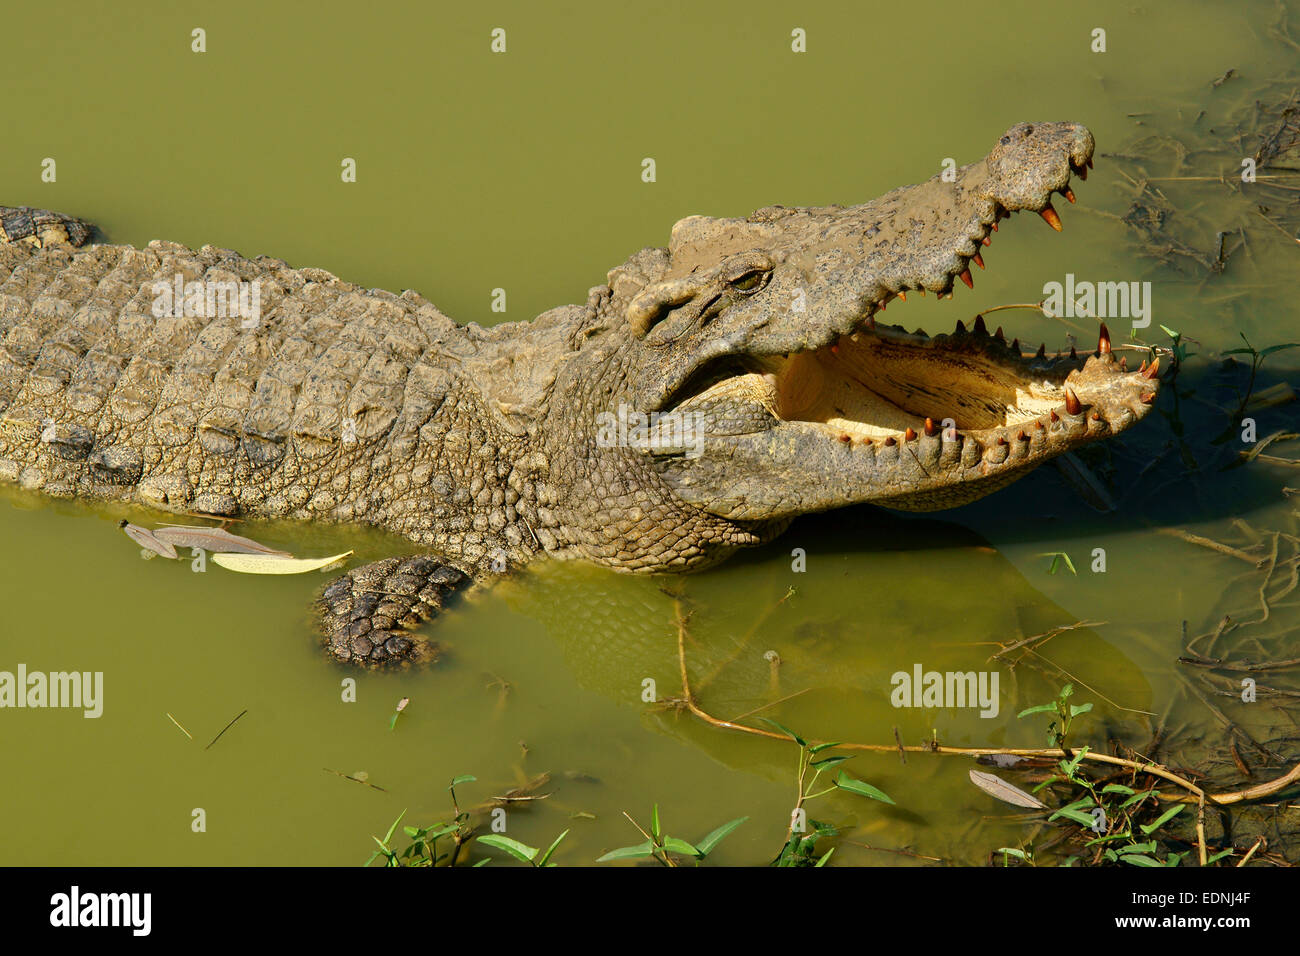 Crocodile with gaping open mouth showing teeth Stock Photo